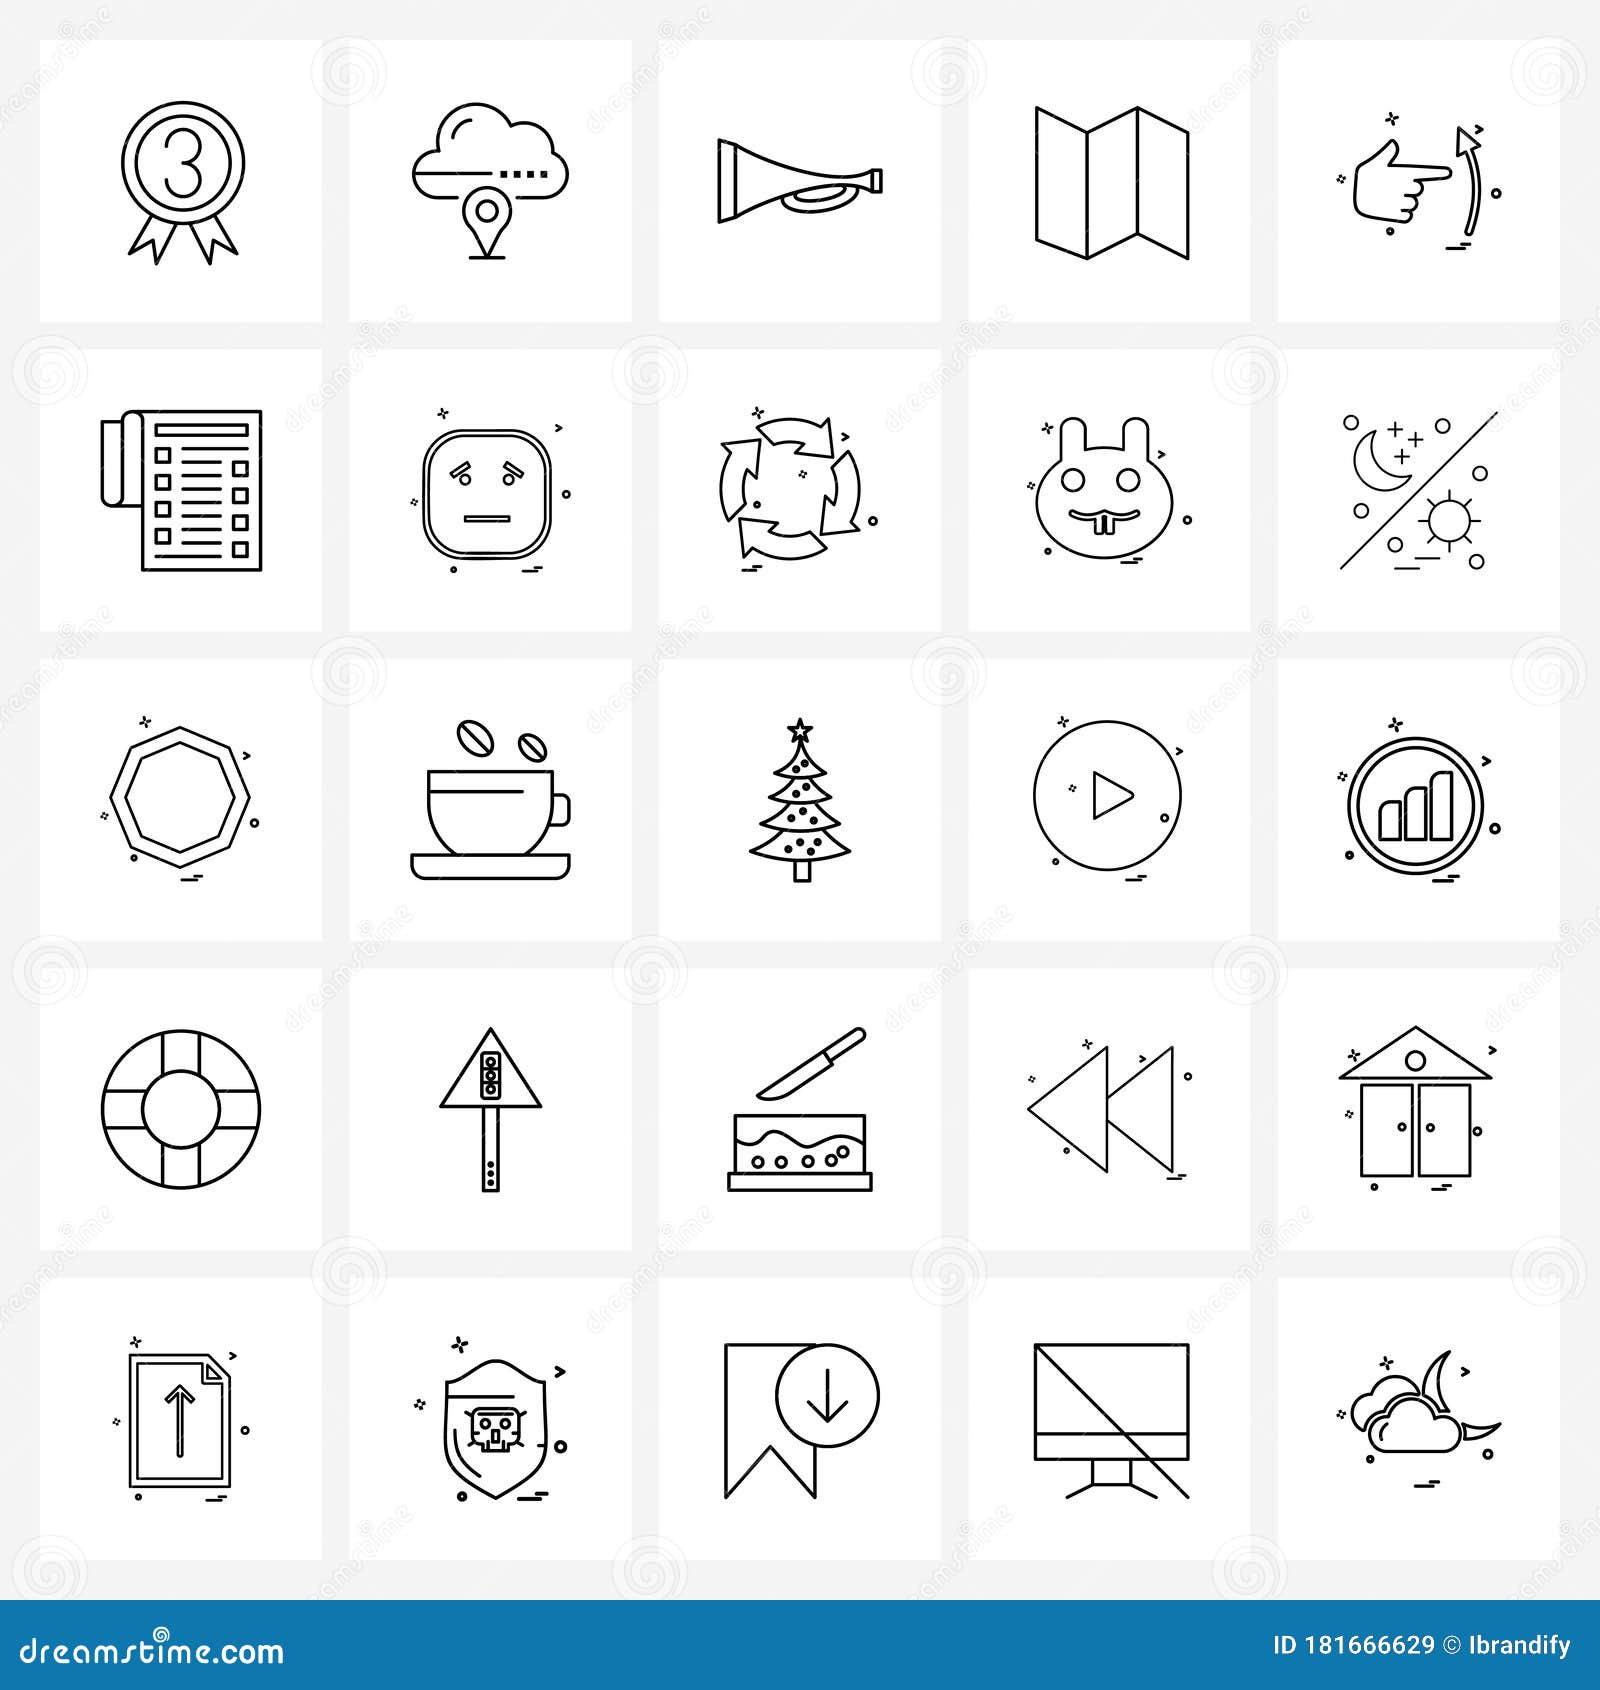 universal s of 25 modern line icons of hand, maps, internet, location, beep